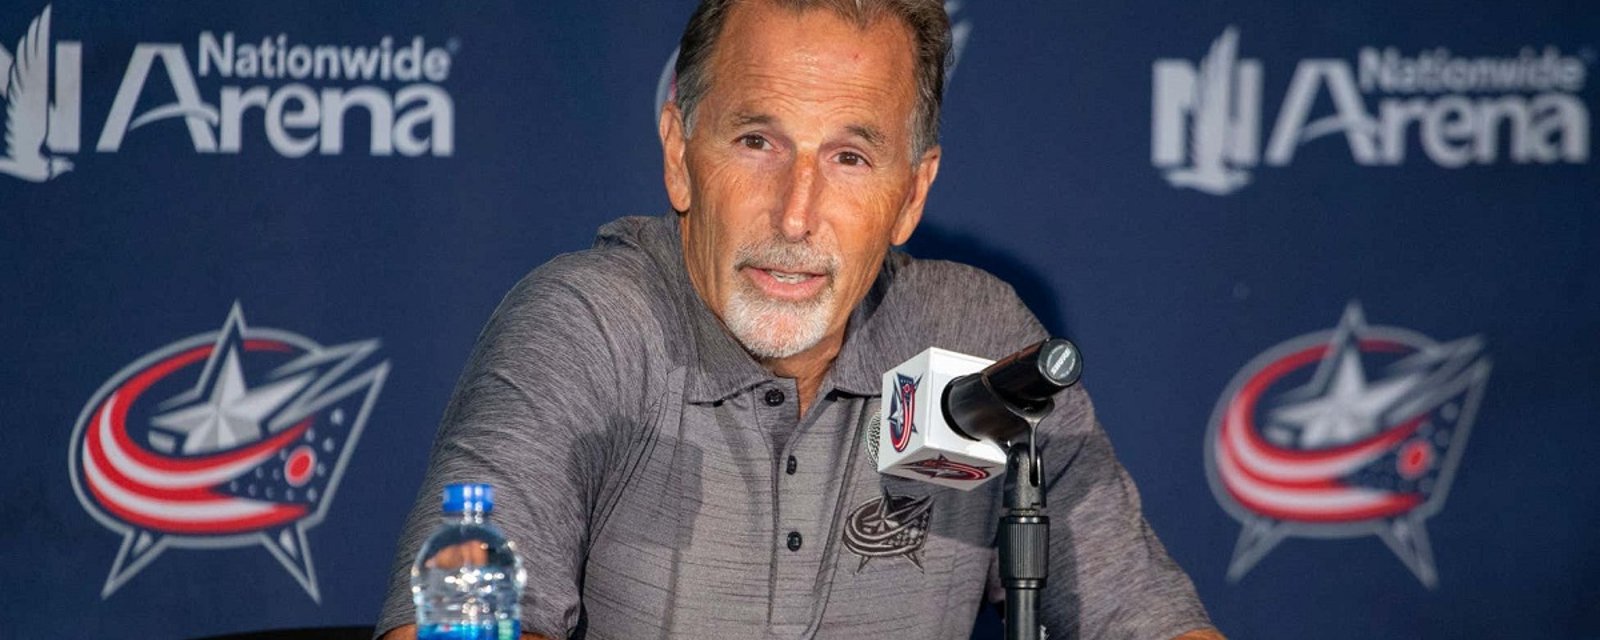 Tortorella goes off at the start of his presence conference, defends Sheldon Keefe.